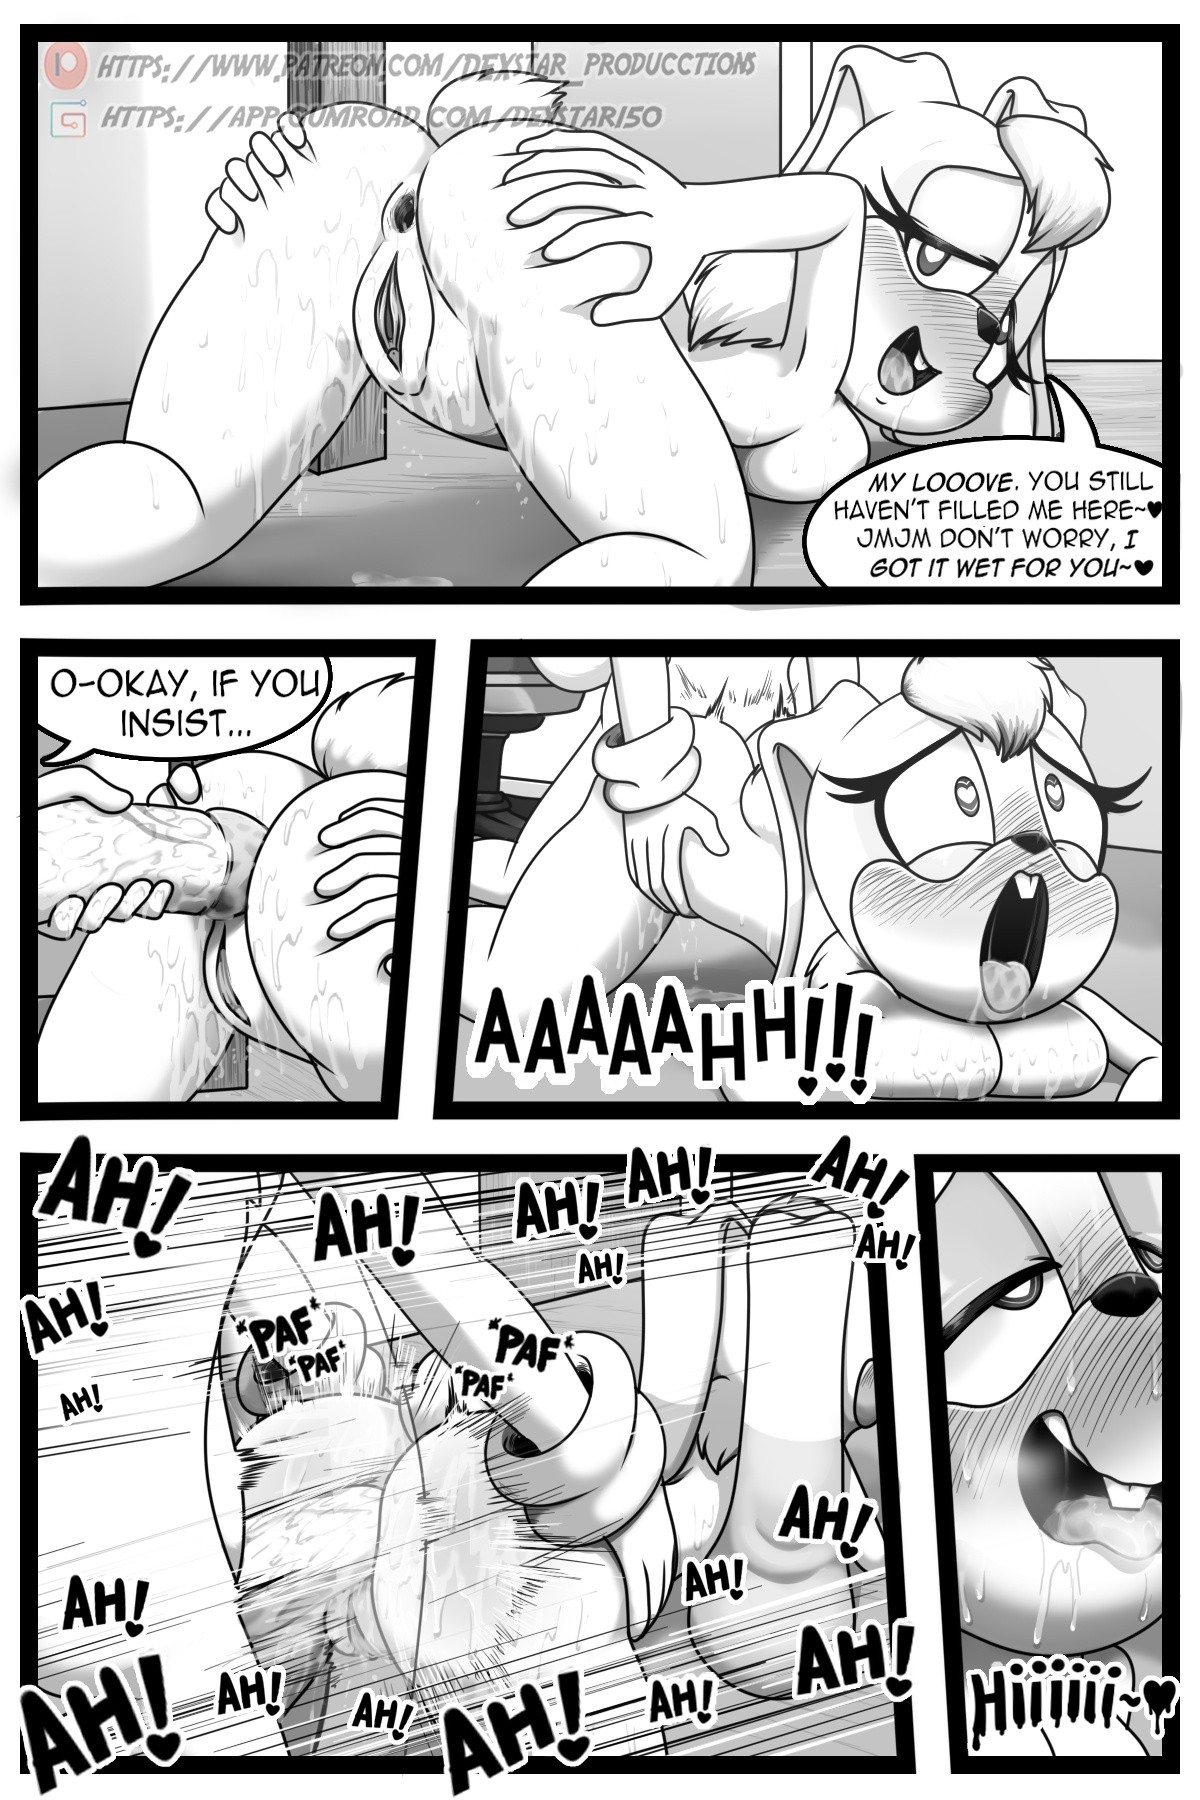 Please Fuck Me: Cream x Tail - Extra Story! porn comic picture 39